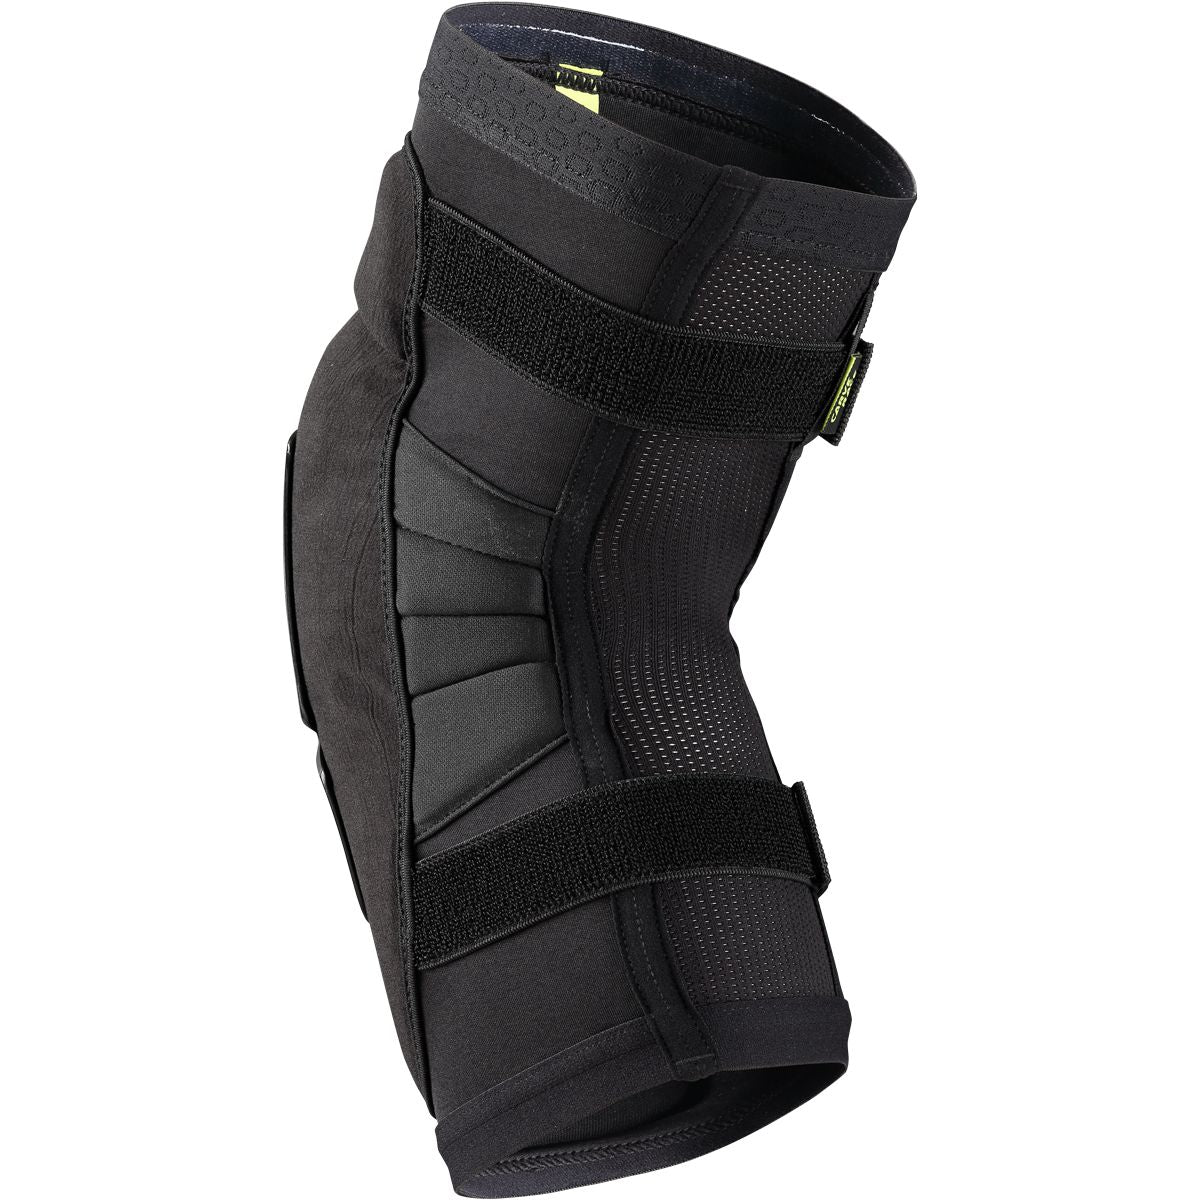 iXS iXS Carve Race Knee Guards - Lower Body Protection - Bicycle Warehouse